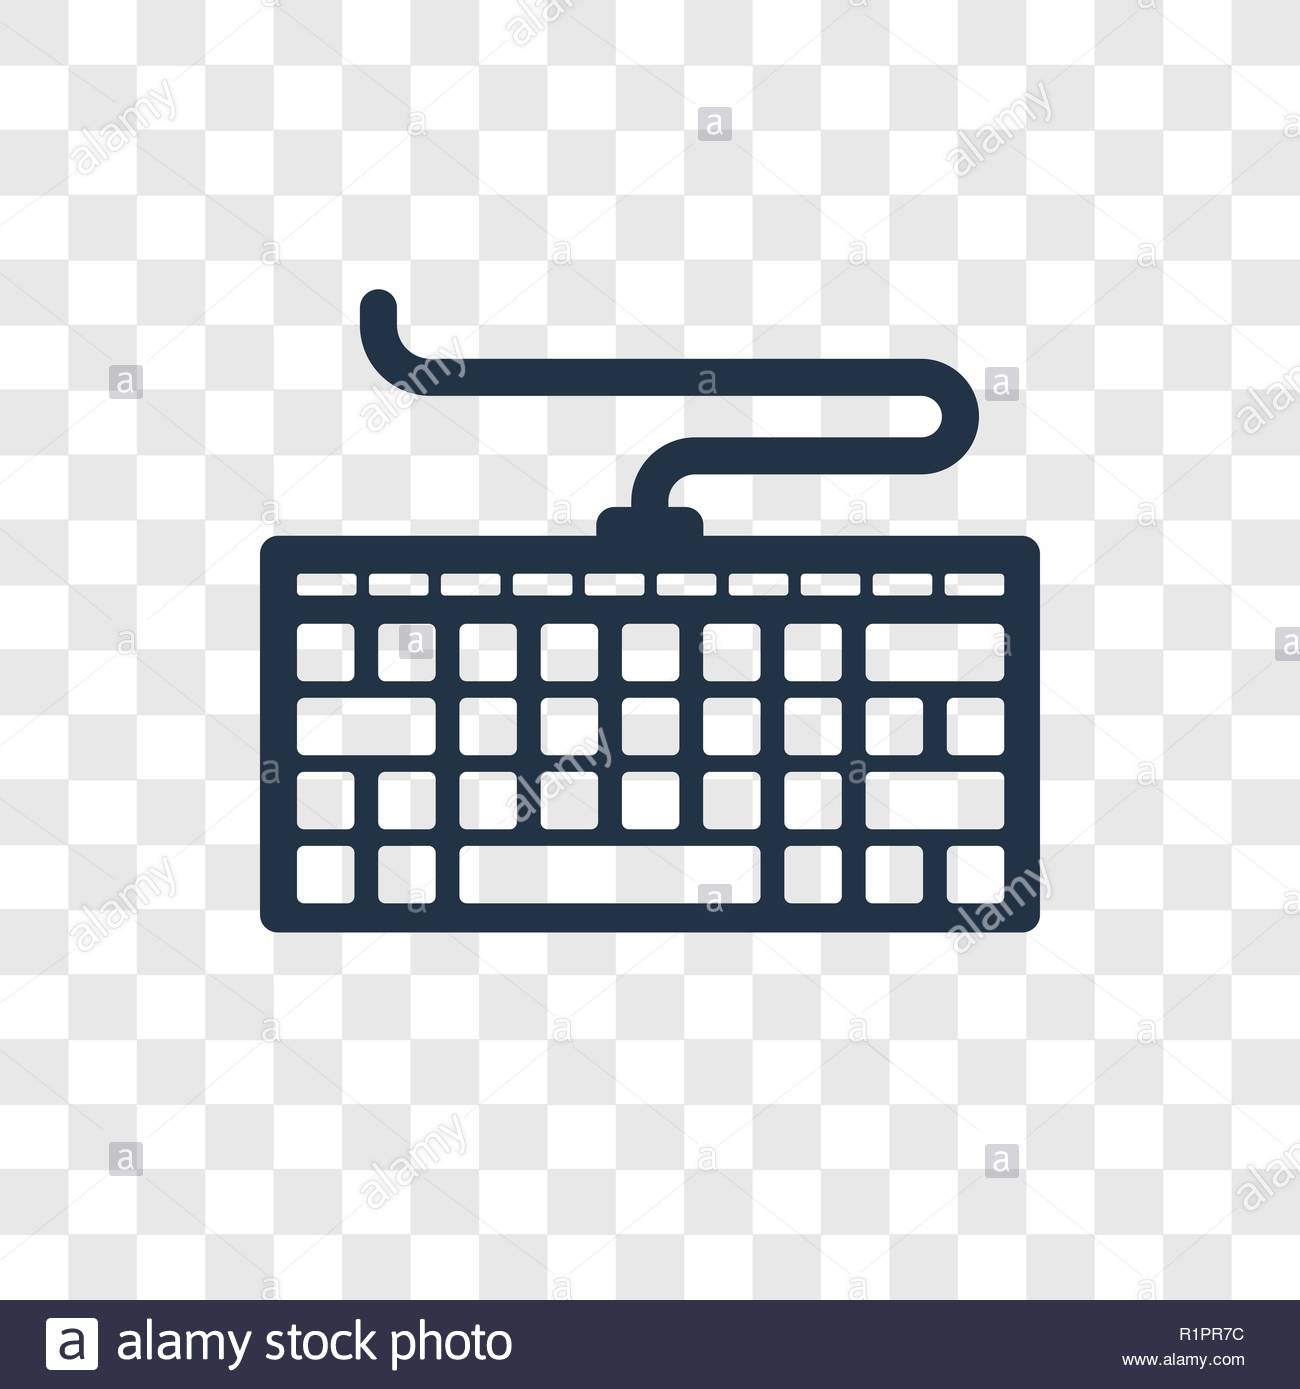 Computer Keyboard vector icon isolated on transparent background